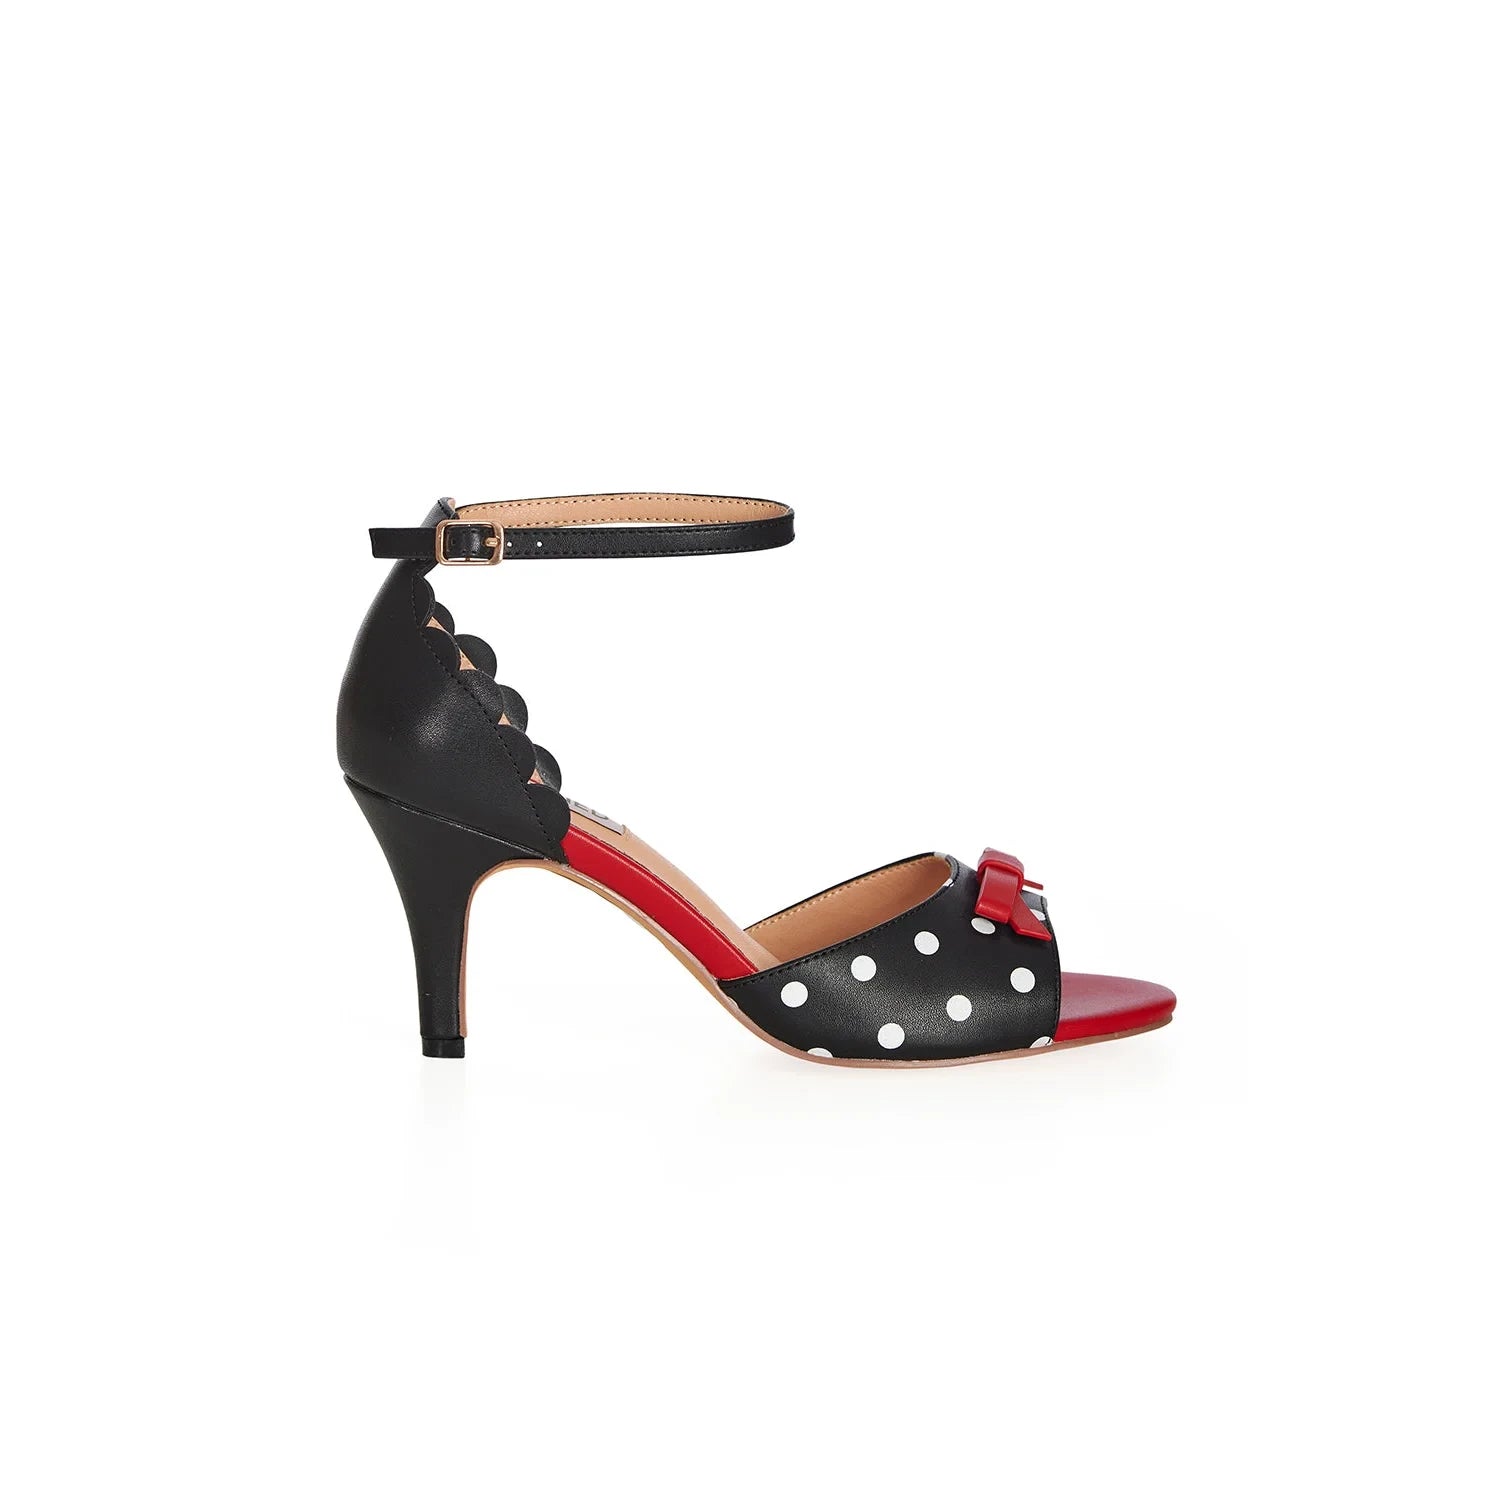 Black and White Polka Dot Open Toe Heels with Red Bow Detail